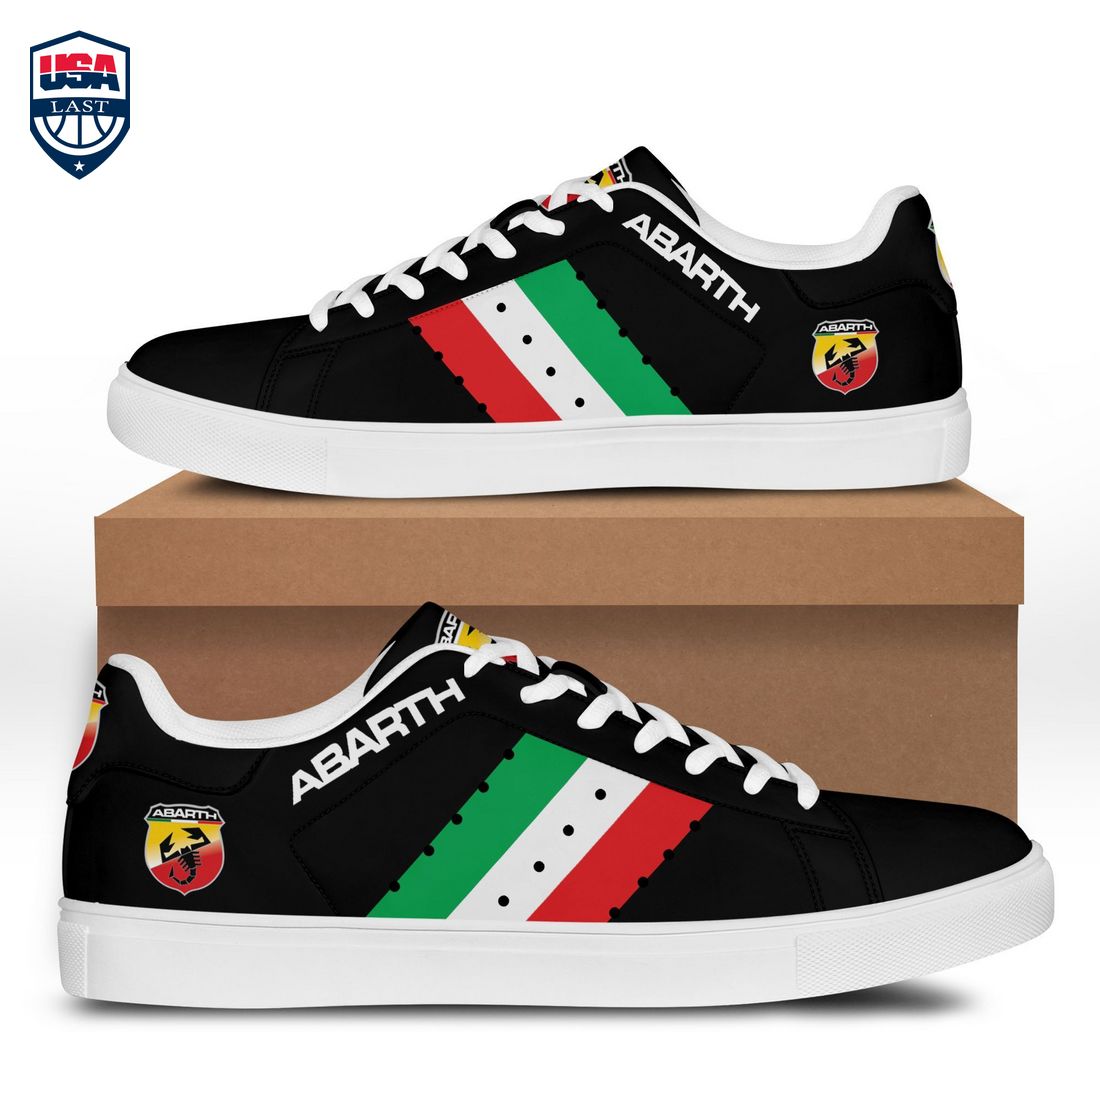 abarth-green-white-red-stripes-style-1-stan-smith-low-top-shoes-1-lUsnN.jpg